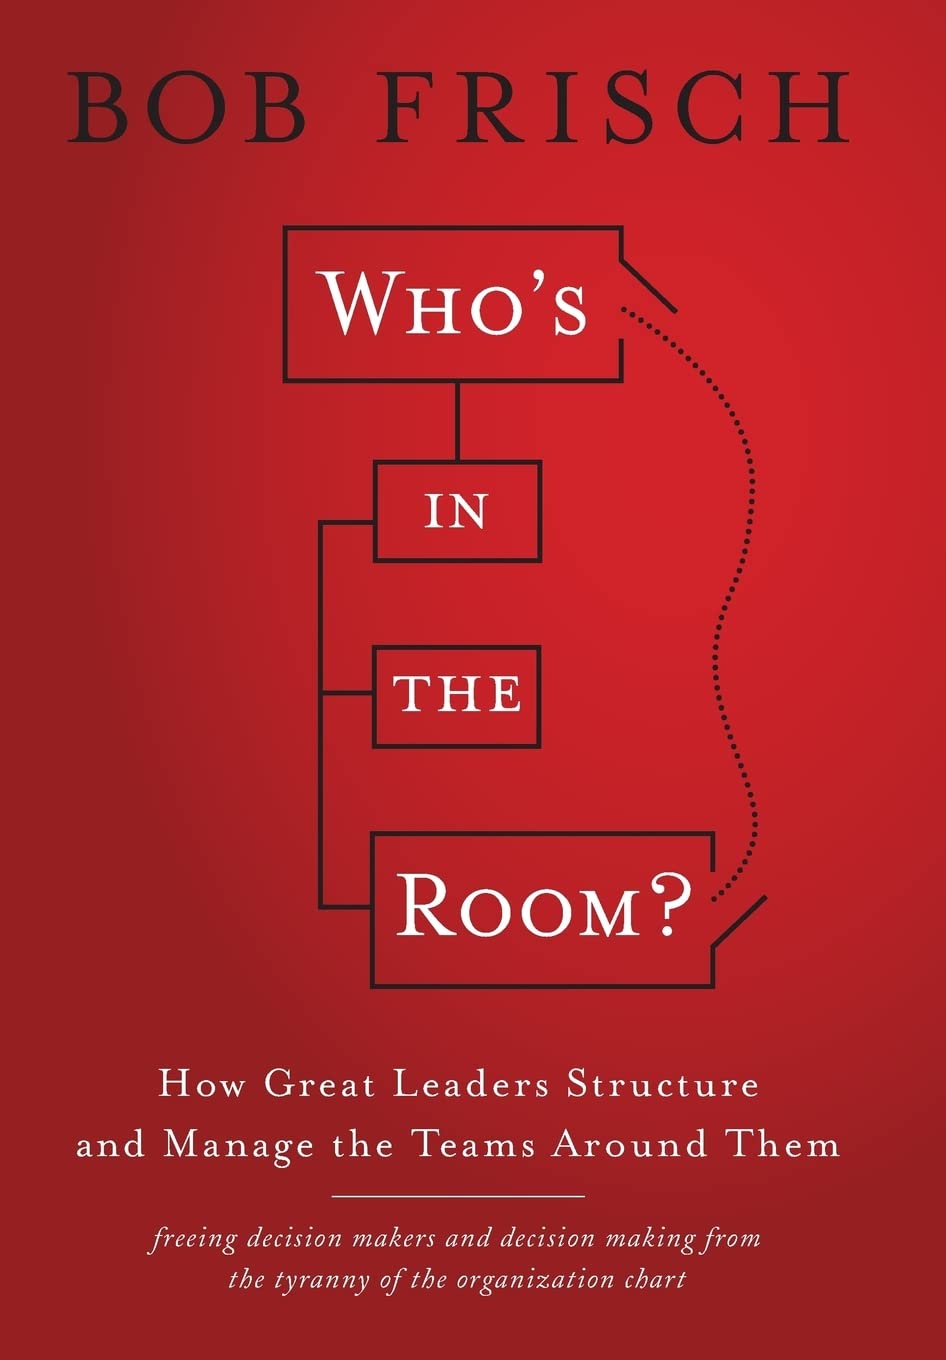 How-Great-Leaders-Structure-and-Manage-the-Teams-Around-Them